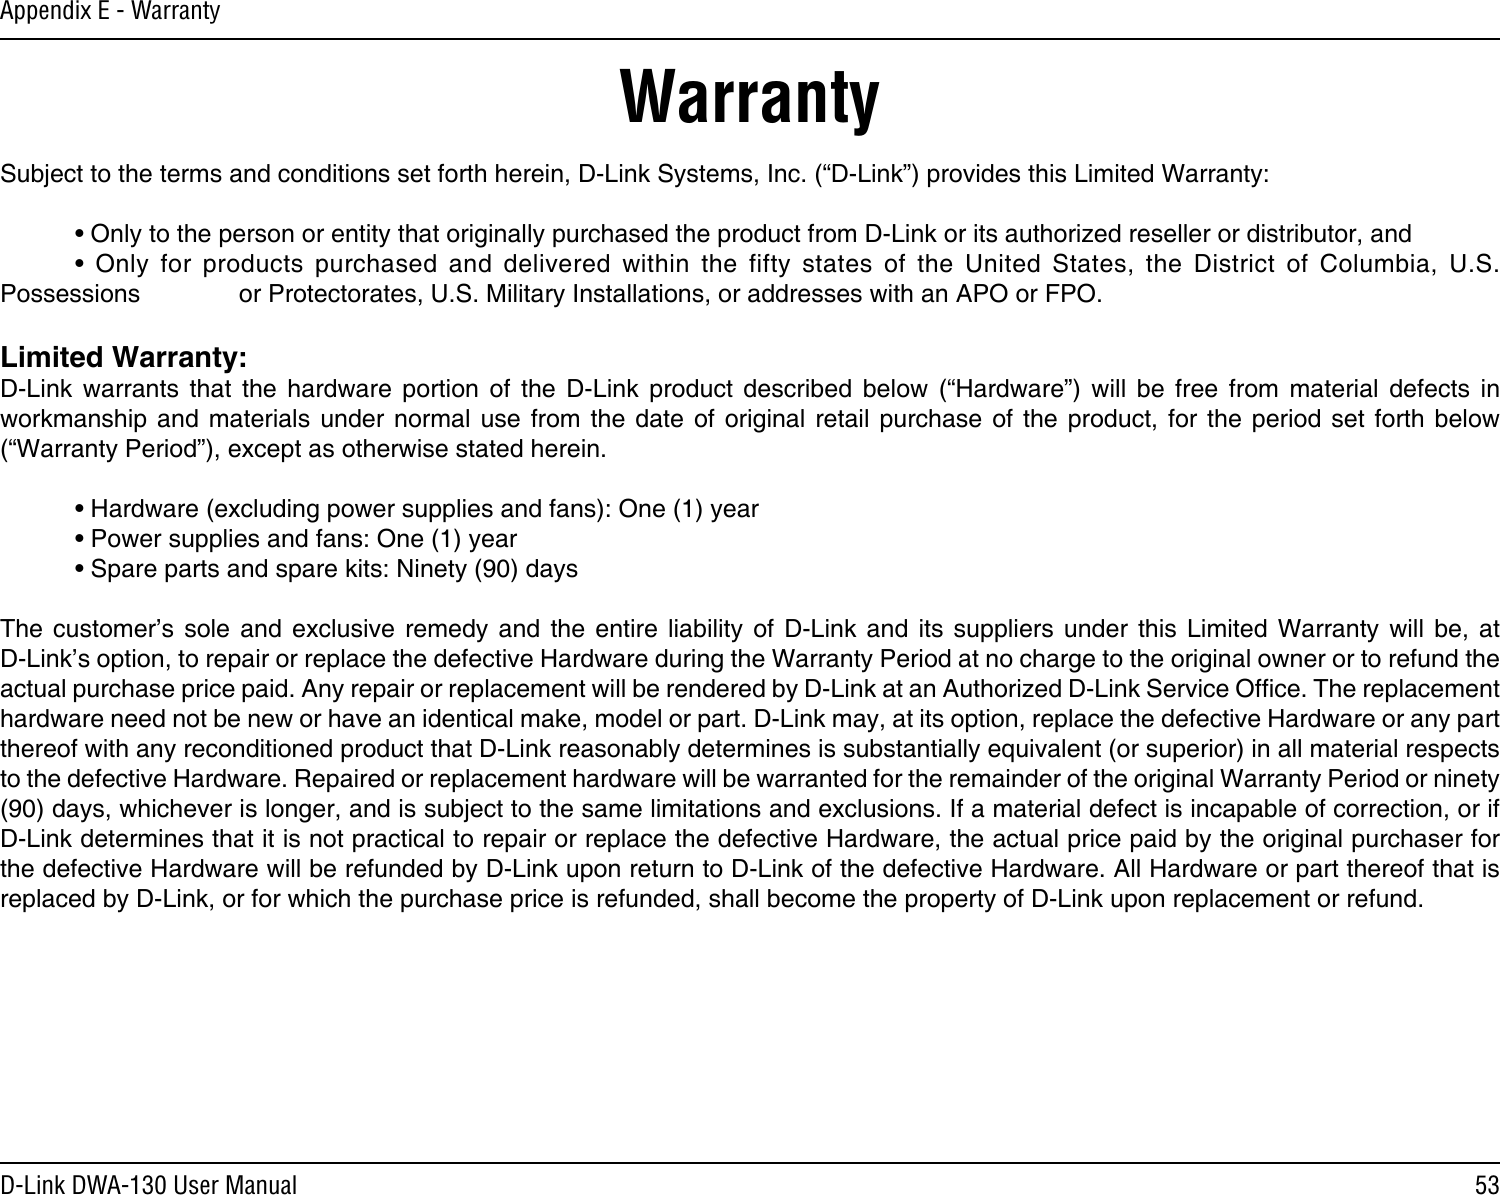 53D-Link DWA-130 User ManualAppendix E - WarrantyWarrantySubject to the terms and conditions set forth herein, D-Link Systems, Inc. (“D-Link”) provides this Limited Warranty:  • Only to the person or entity that originally purchased the product from D-Link or its authorized reseller or distributor, and  •  Only  for  products  purchased  and  delivered  within  the  fifty  states  of  the  United  States,  the  District  of  Columbia,  U.S. Possessions      or Protectorates, U.S. Military Installations, or addresses with an APO or FPO.Limited Warranty:D-Link  warrants  that  the  hardware  portion  of  the  D-Link  product  described  below  (“Hardware”)  will  be  free  from  material  defects  in workmanship  and  materials  under  normal  use  from  the  date of  original  retail  purchase  of  the  product,  for  the period  set  forth  below (“Warranty Period”), except as otherwise stated herein.  • Hardware (excluding power supplies and fans): One (1) year  • Power supplies and fans: One (1) year  • Spare parts and spare kits: Ninety (90) daysThe  customer’s  sole  and  exclusive  remedy  and  the  entire  liability  of  D-Link  and  its  suppliers  under  this  Limited  Warranty  will  be,  at  D-Link’s option, to repair or replace the defective Hardware during the Warranty Period at no charge to the original owner or to refund the actual purchase price paid. Any repair or replacement will be rendered by D-Link at an Authorized D-Link Service Ofce. The replacement hardware need not be new or have an identical make, model or part. D-Link may, at its option, replace the defective Hardware or any part thereof with any reconditioned product that D-Link reasonably determines is substantially equivalent (or superior) in all material respects to the defective Hardware. Repaired or replacement hardware will be warranted for the remainder of the original Warranty Period or ninety (90) days, whichever is longer, and is subject to the same limitations and exclusions. If a material defect is incapable of correction, or if D-Link determines that it is not practical to repair or replace the defective Hardware, the actual price paid by the original purchaser for the defective Hardware will be refunded by D-Link upon return to D-Link of the defective Hardware. All Hardware or part thereof that is replaced by D-Link, or for which the purchase price is refunded, shall become the property of D-Link upon replacement or refund.